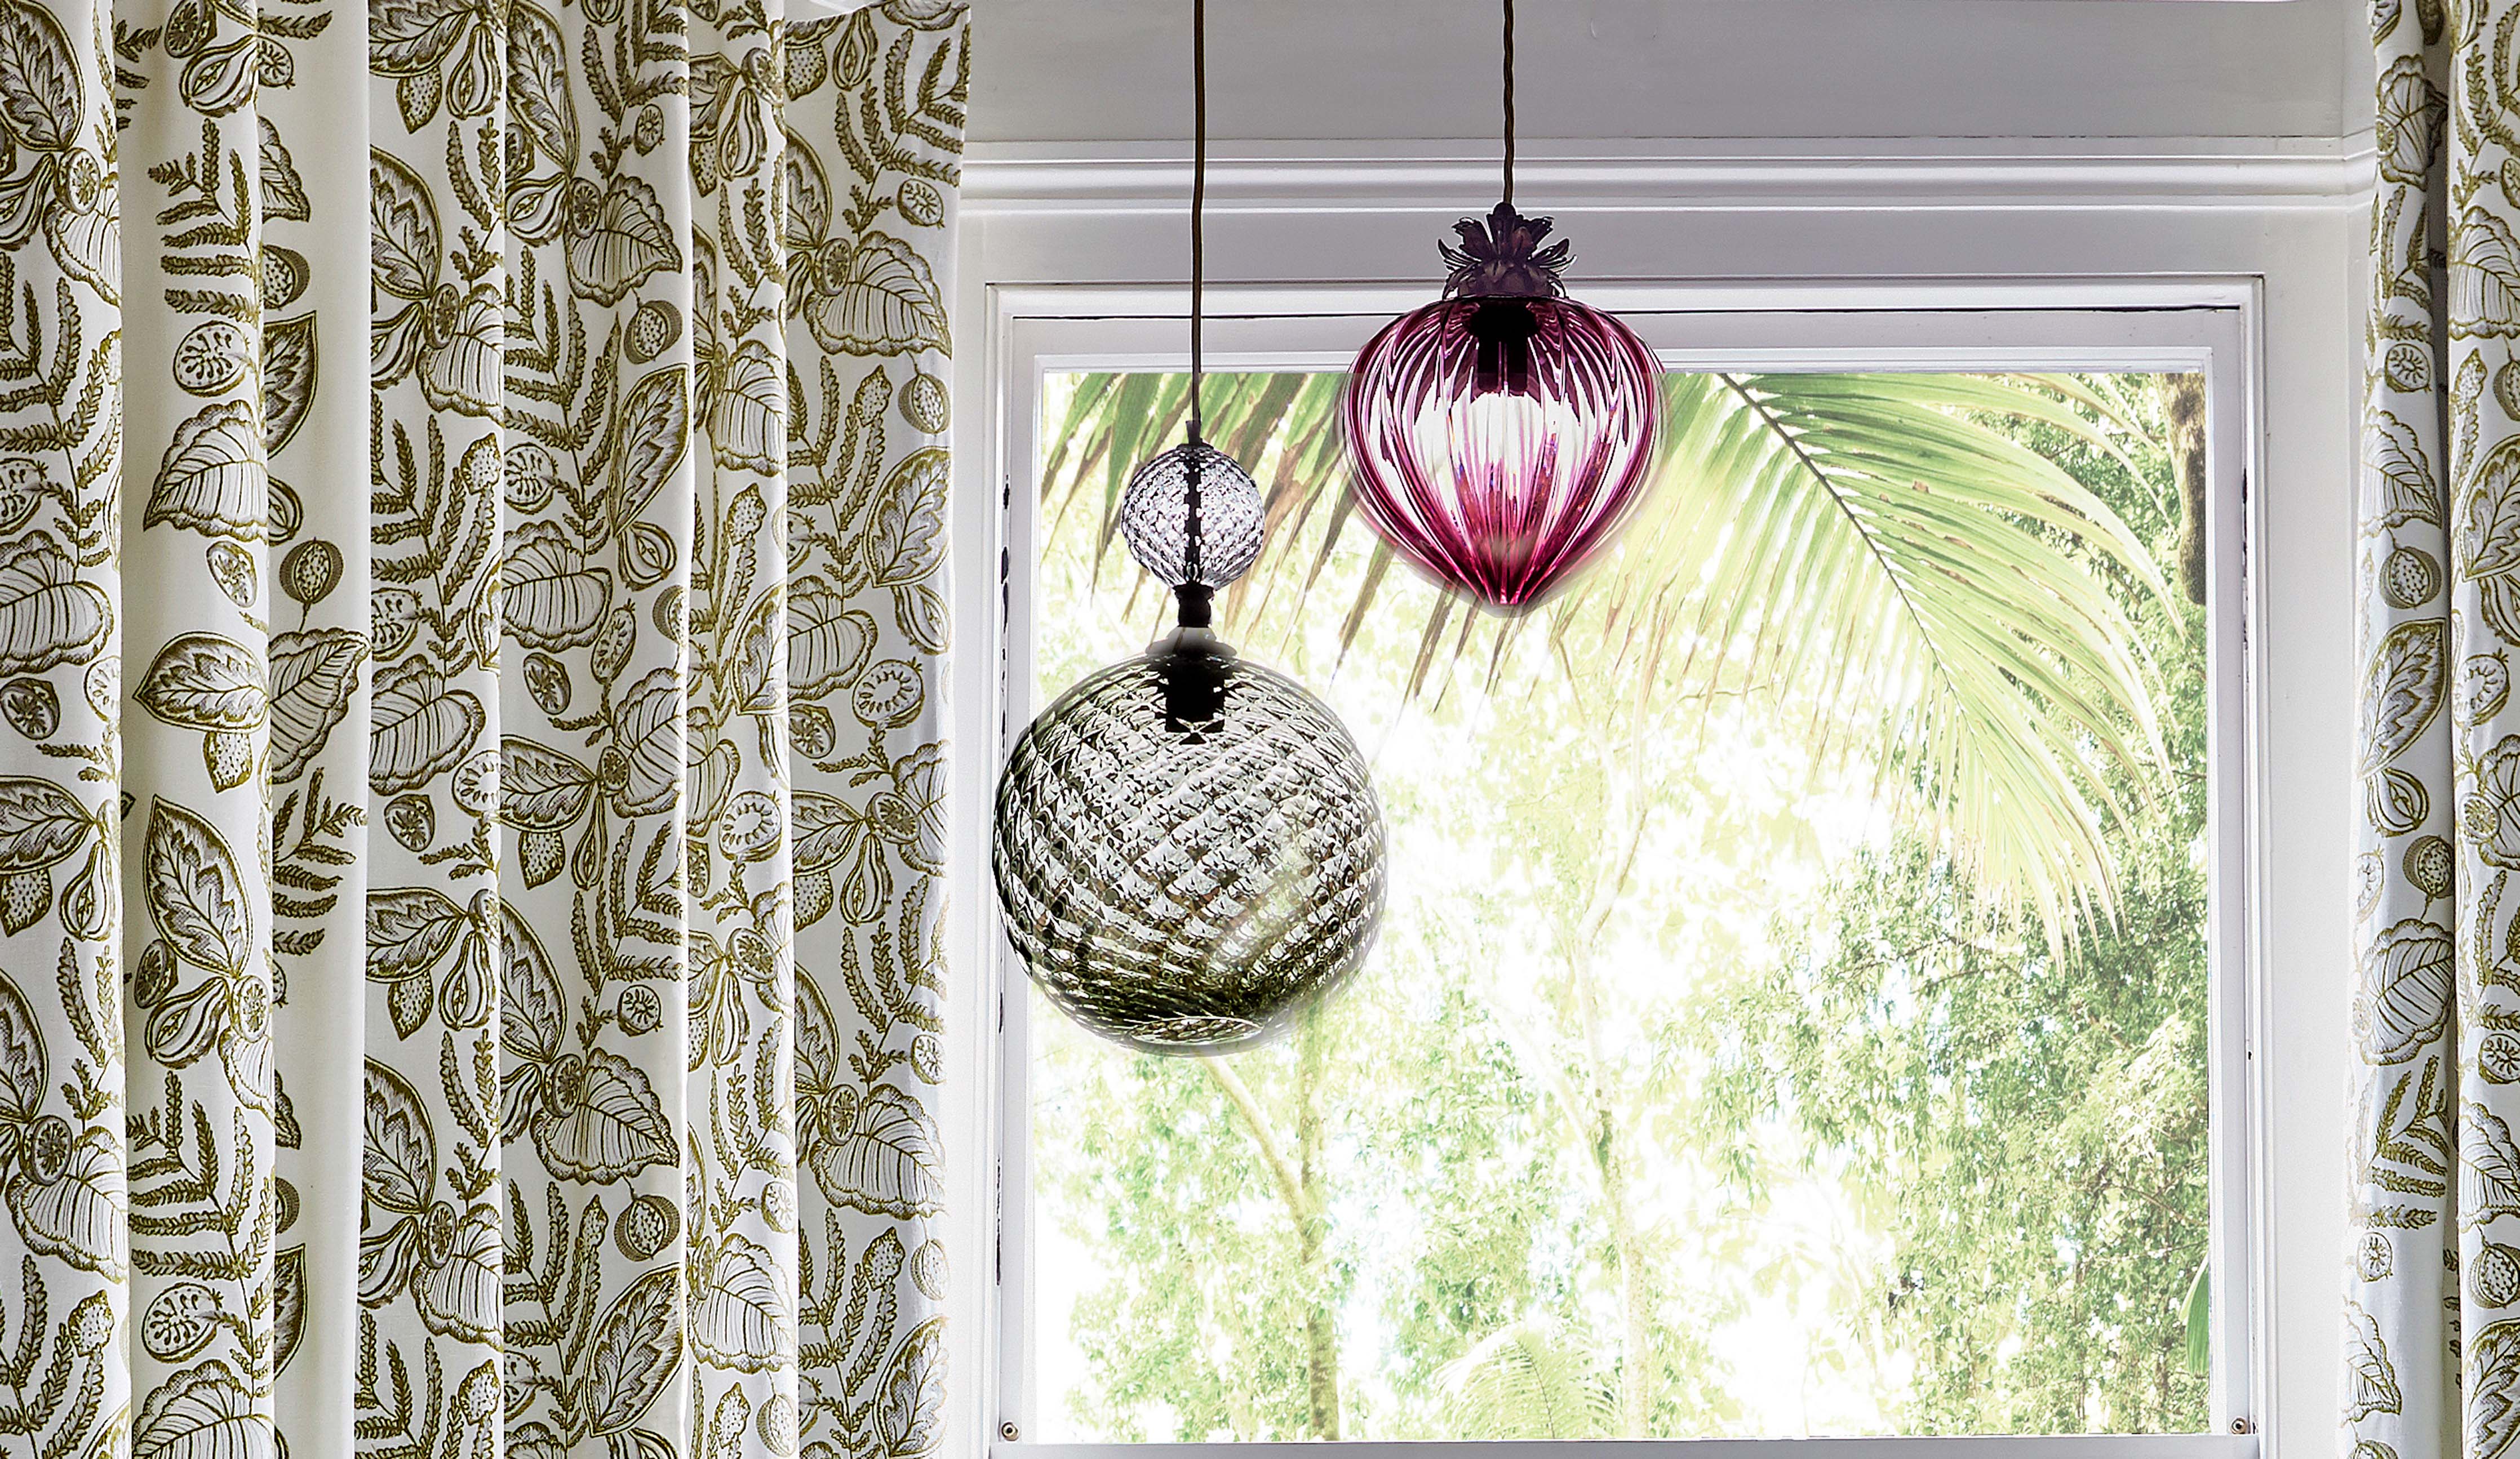 Coloured glass pendant lighting lamps by Rothschild &amp; Bickers  hanging with floral fabric by Prestigious Textiles